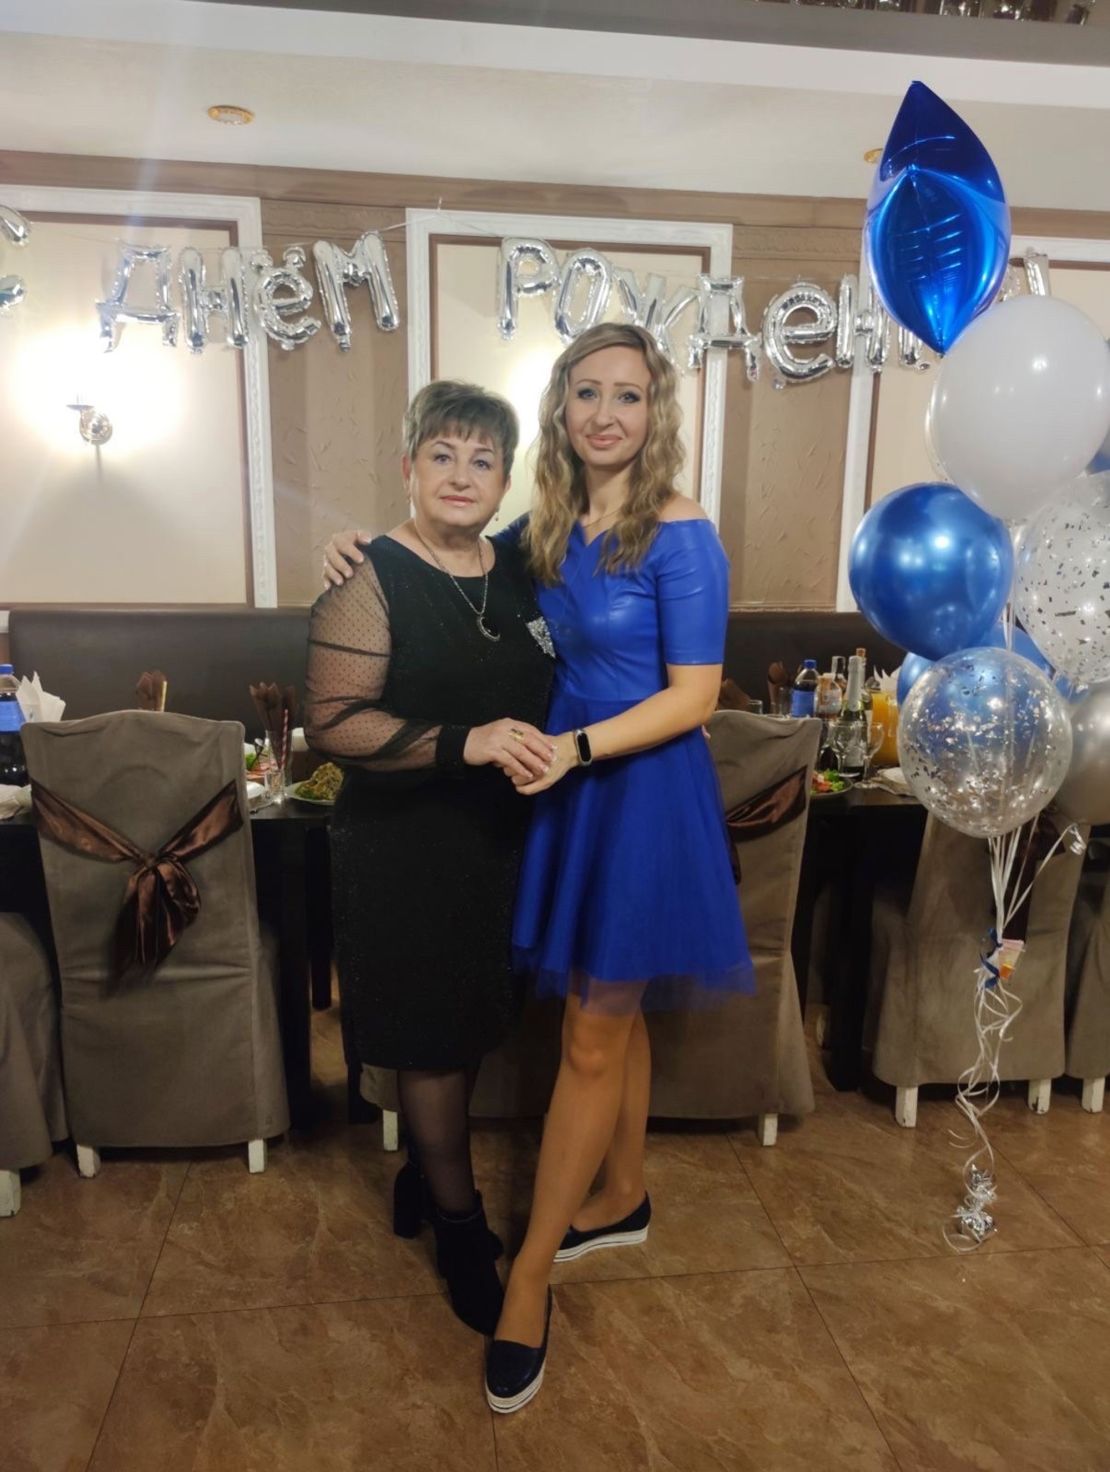 Mother and daughter Halyna and Nataliya at a birthday party in Mariupol, May 2021.